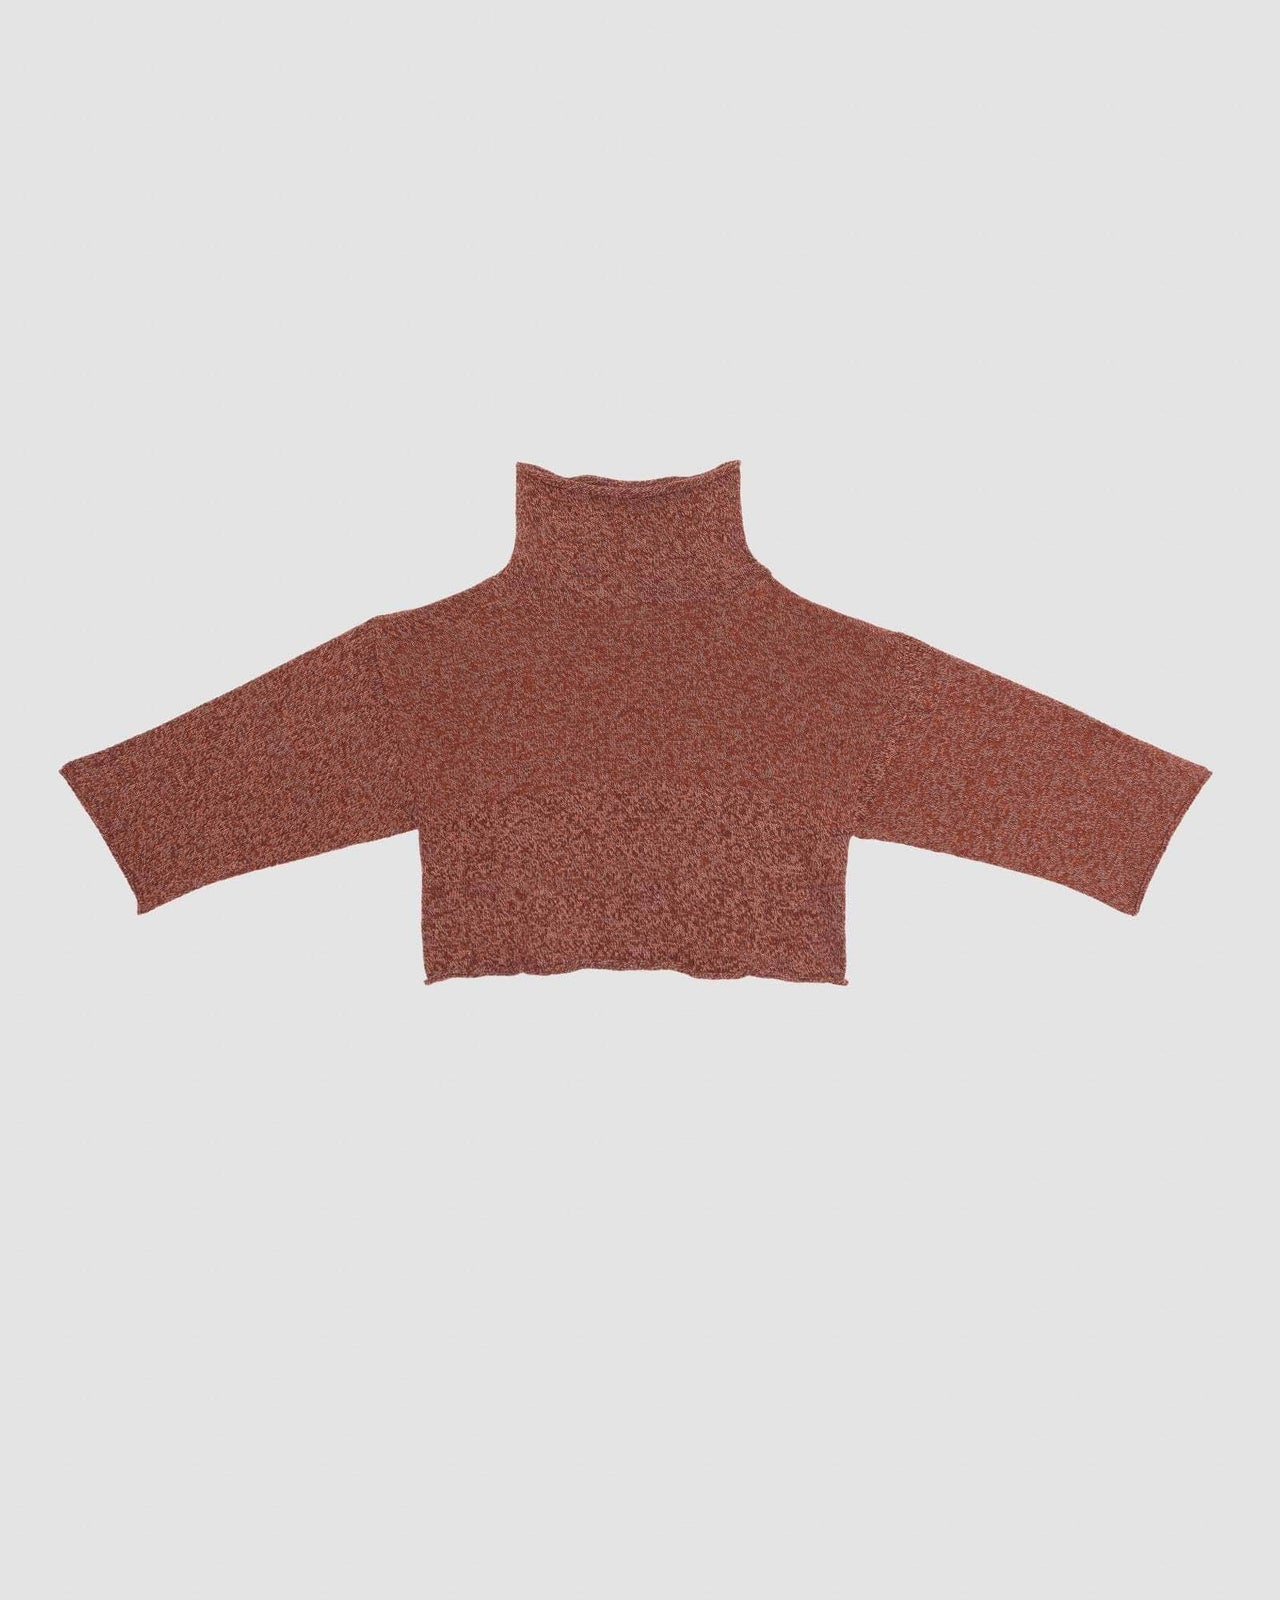 Knits | Basics in Natural and Recycled Fibers | バセランジュ